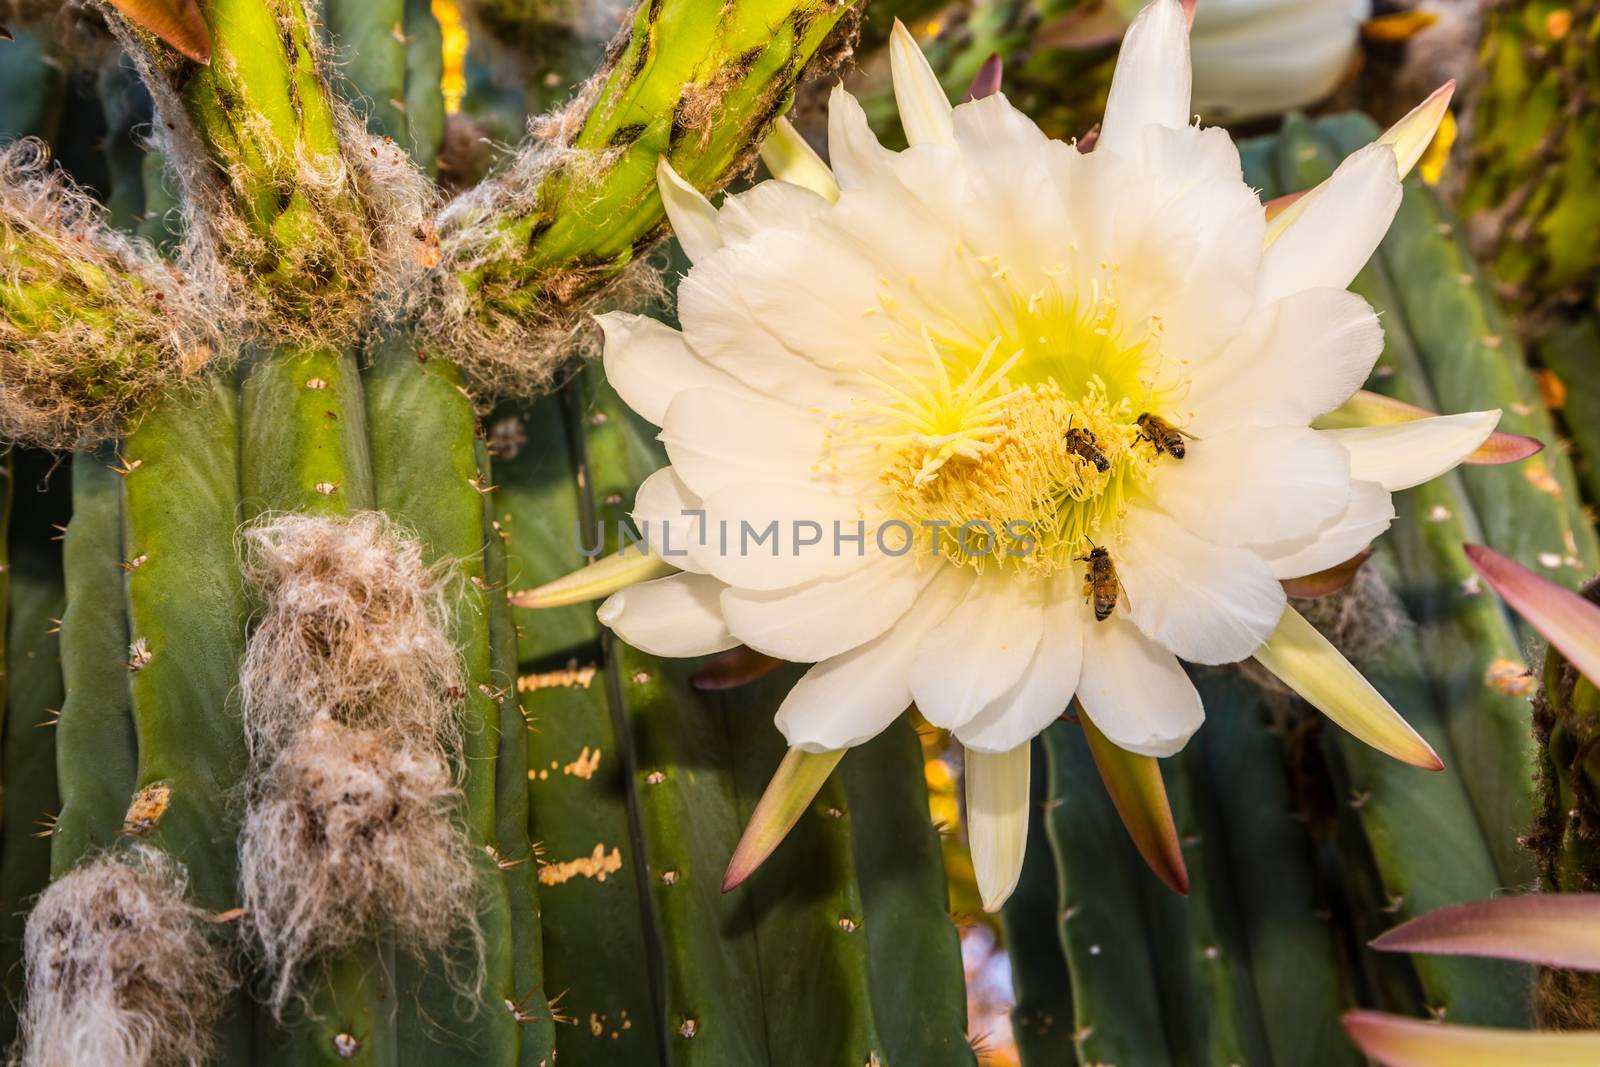 Bees gathering pollen from rare bloom on cereus cactus